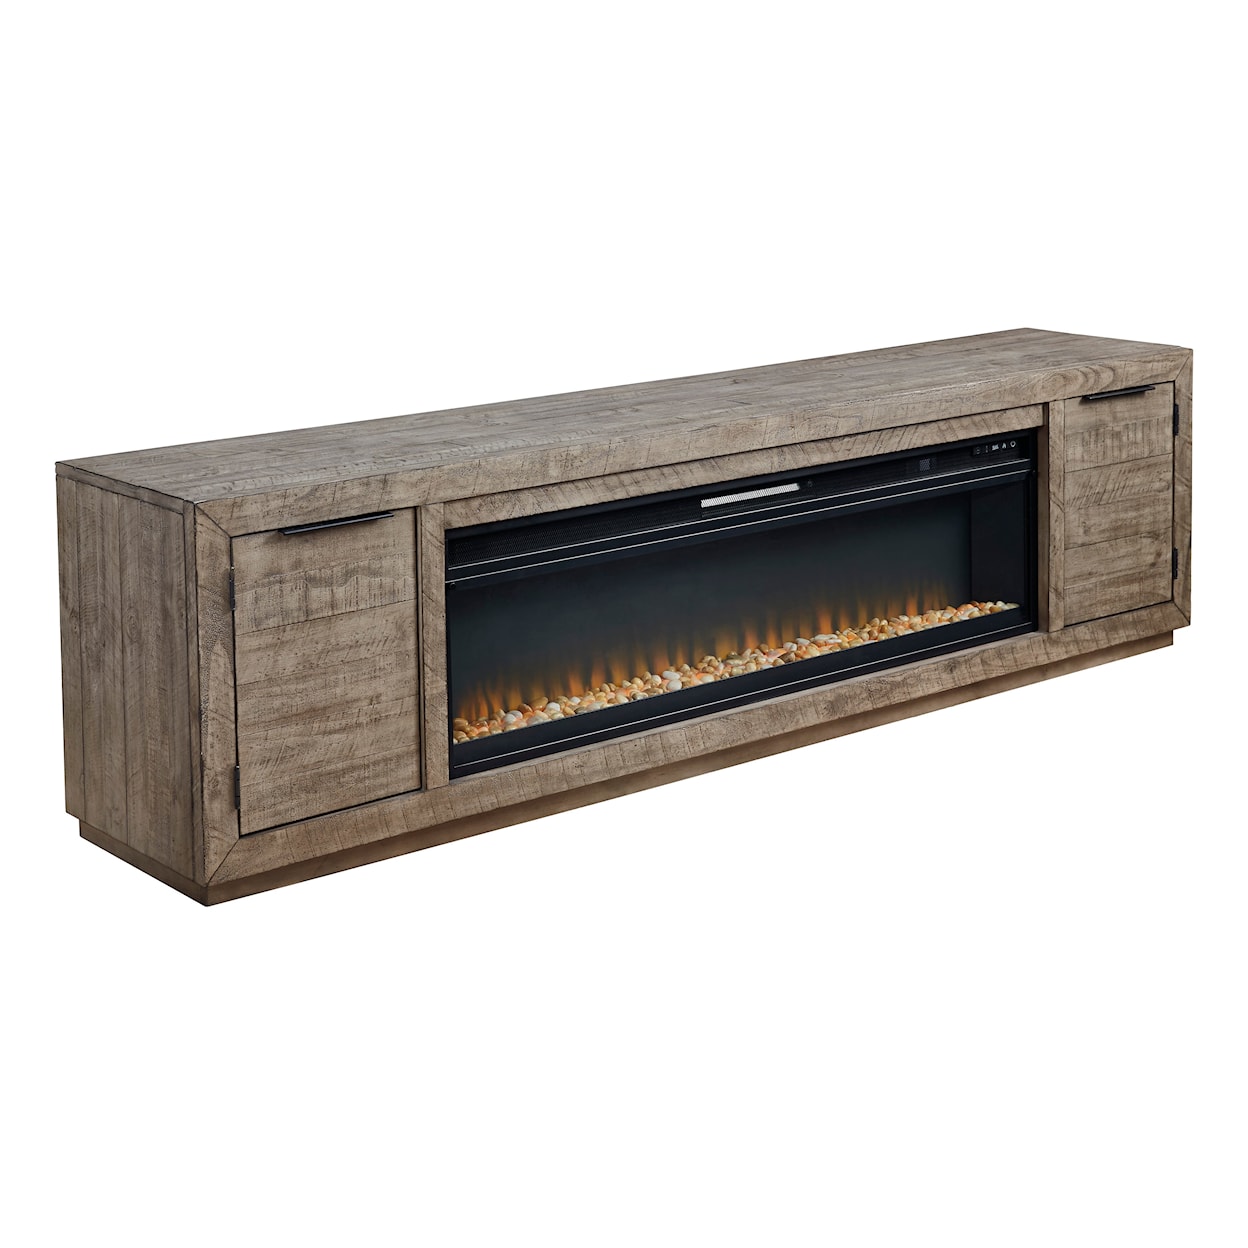 Signature Design by Ashley Furniture Krystanza TV Stand with Electric Fireplace